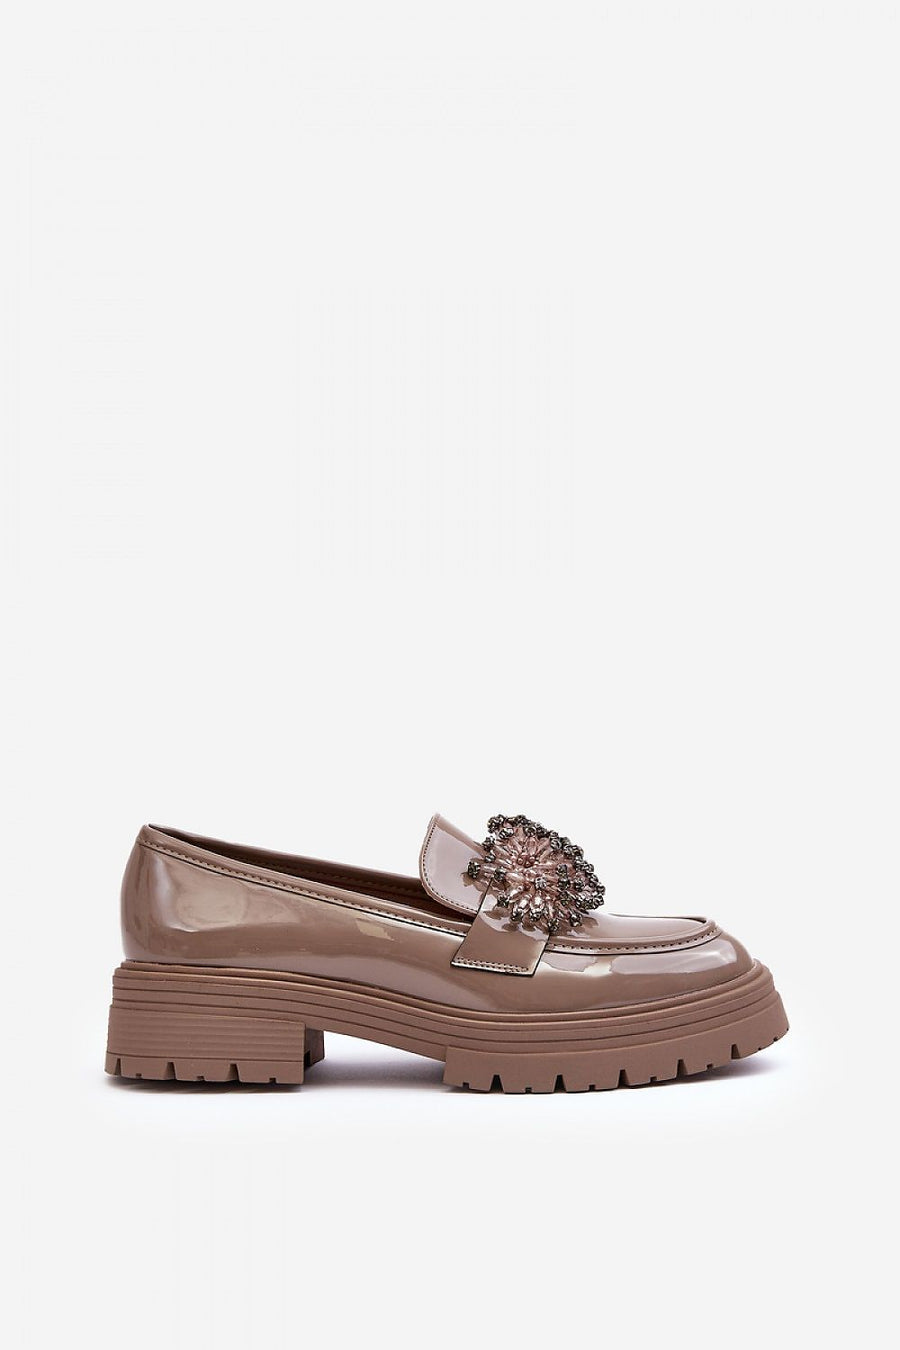 Loafers with a flat heel in beige.